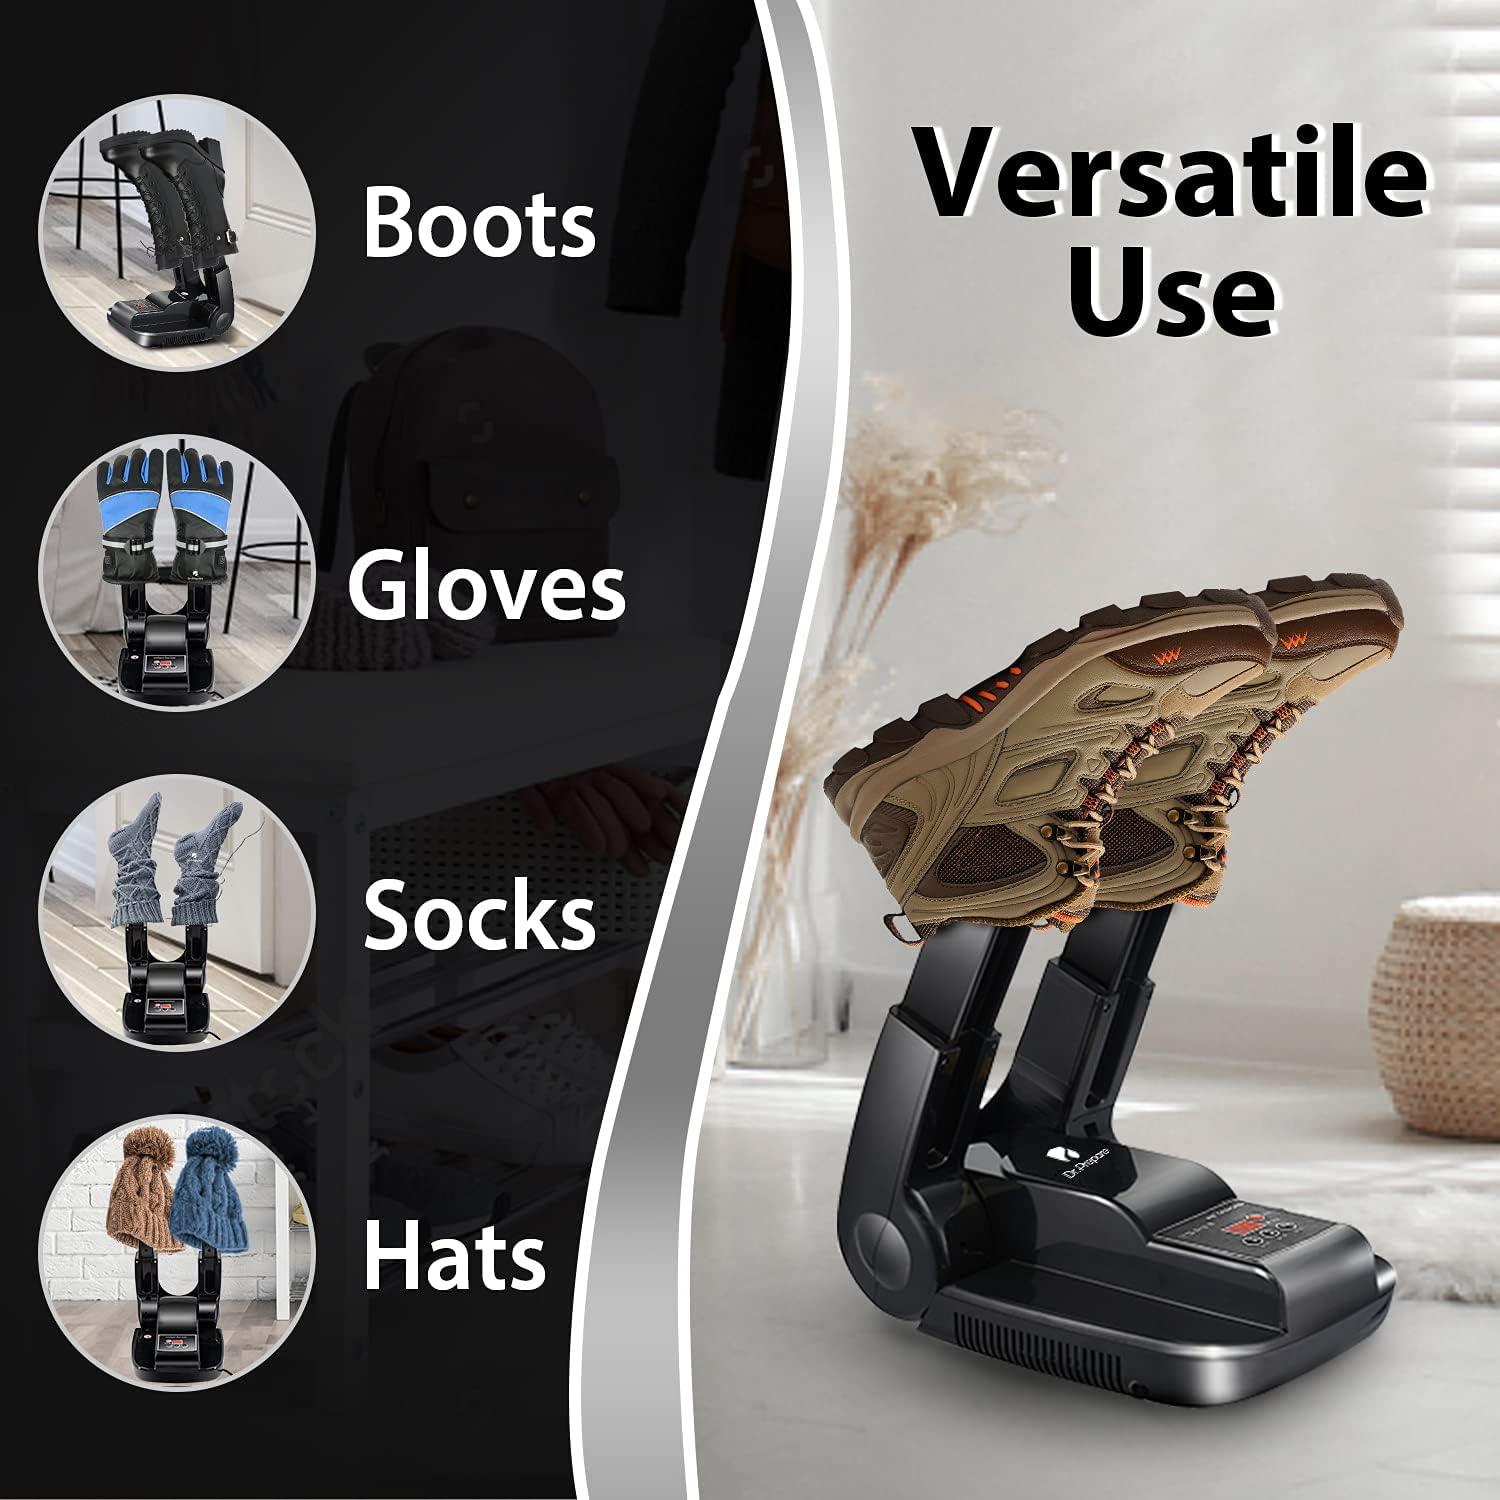 upstartech Boot Dryer with Timer Heat Blower,Portable Shoes Dryer Glove  Dryer Folding Drying Adjustable Rack, Boot Dryer for Work Boots Hats,  Socks